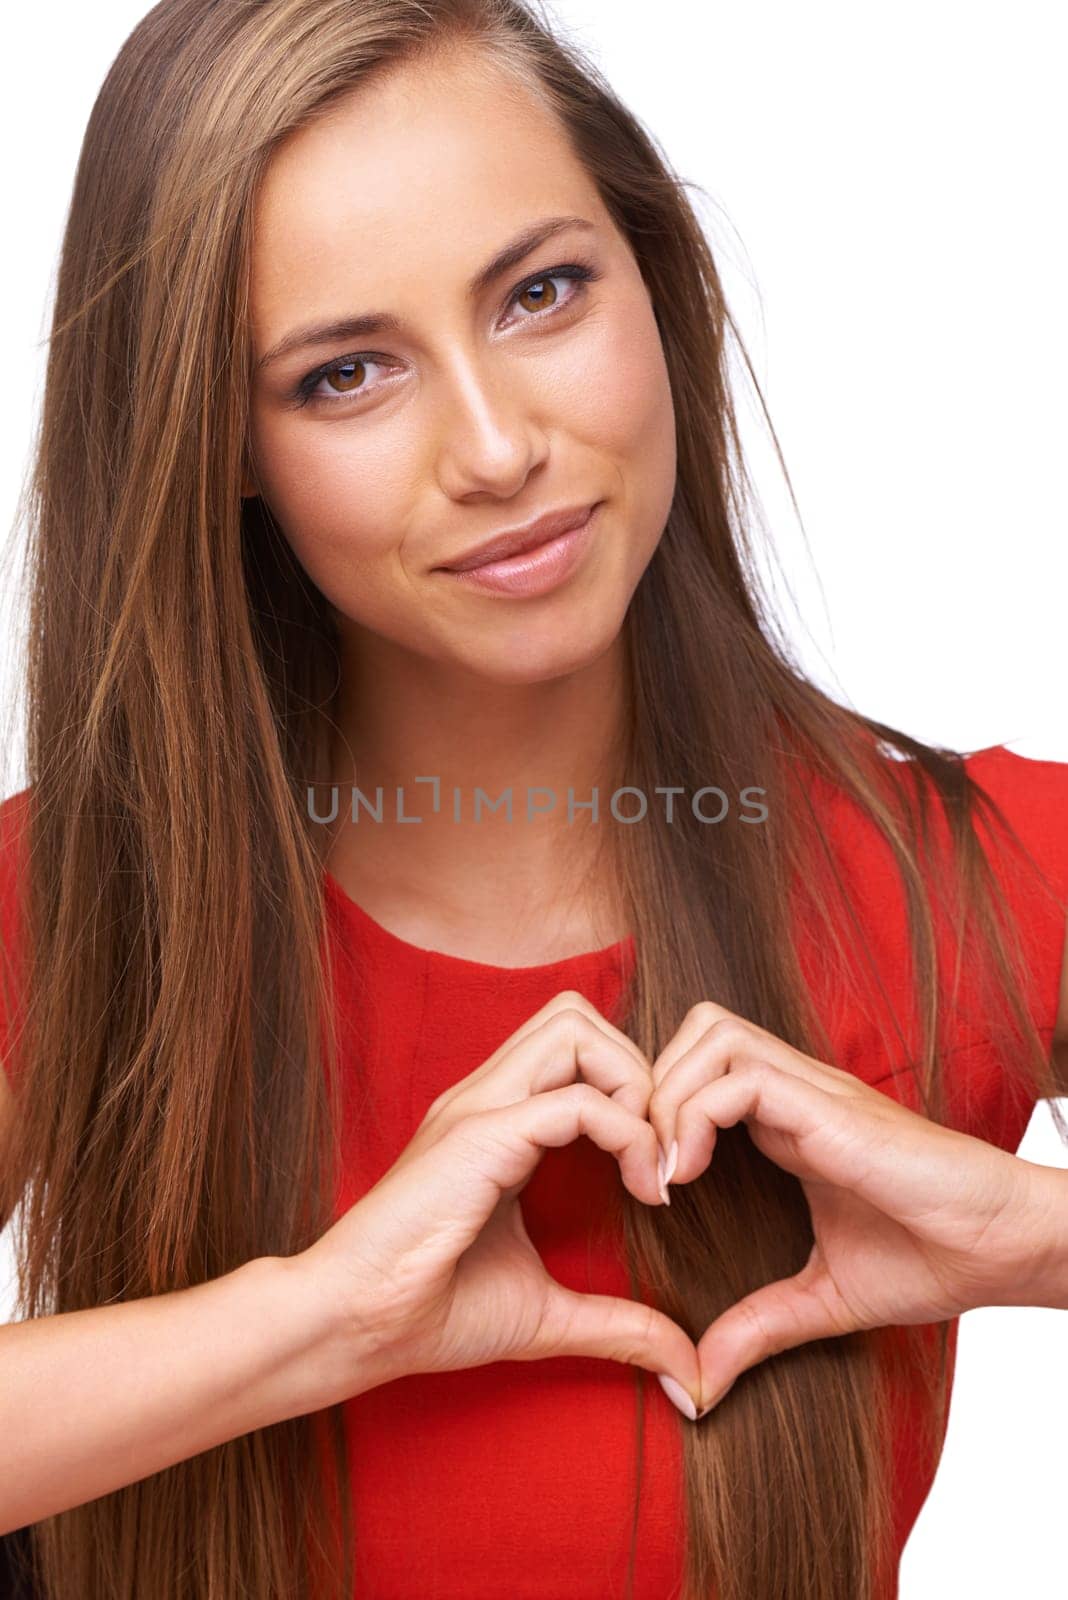 Woman, love portrait and hands shape together for support, peace and relax calm energy in white background. Model, face and heart symbol, emoji icon sign and romance hand gesture isolated in studio by YuriArcurs